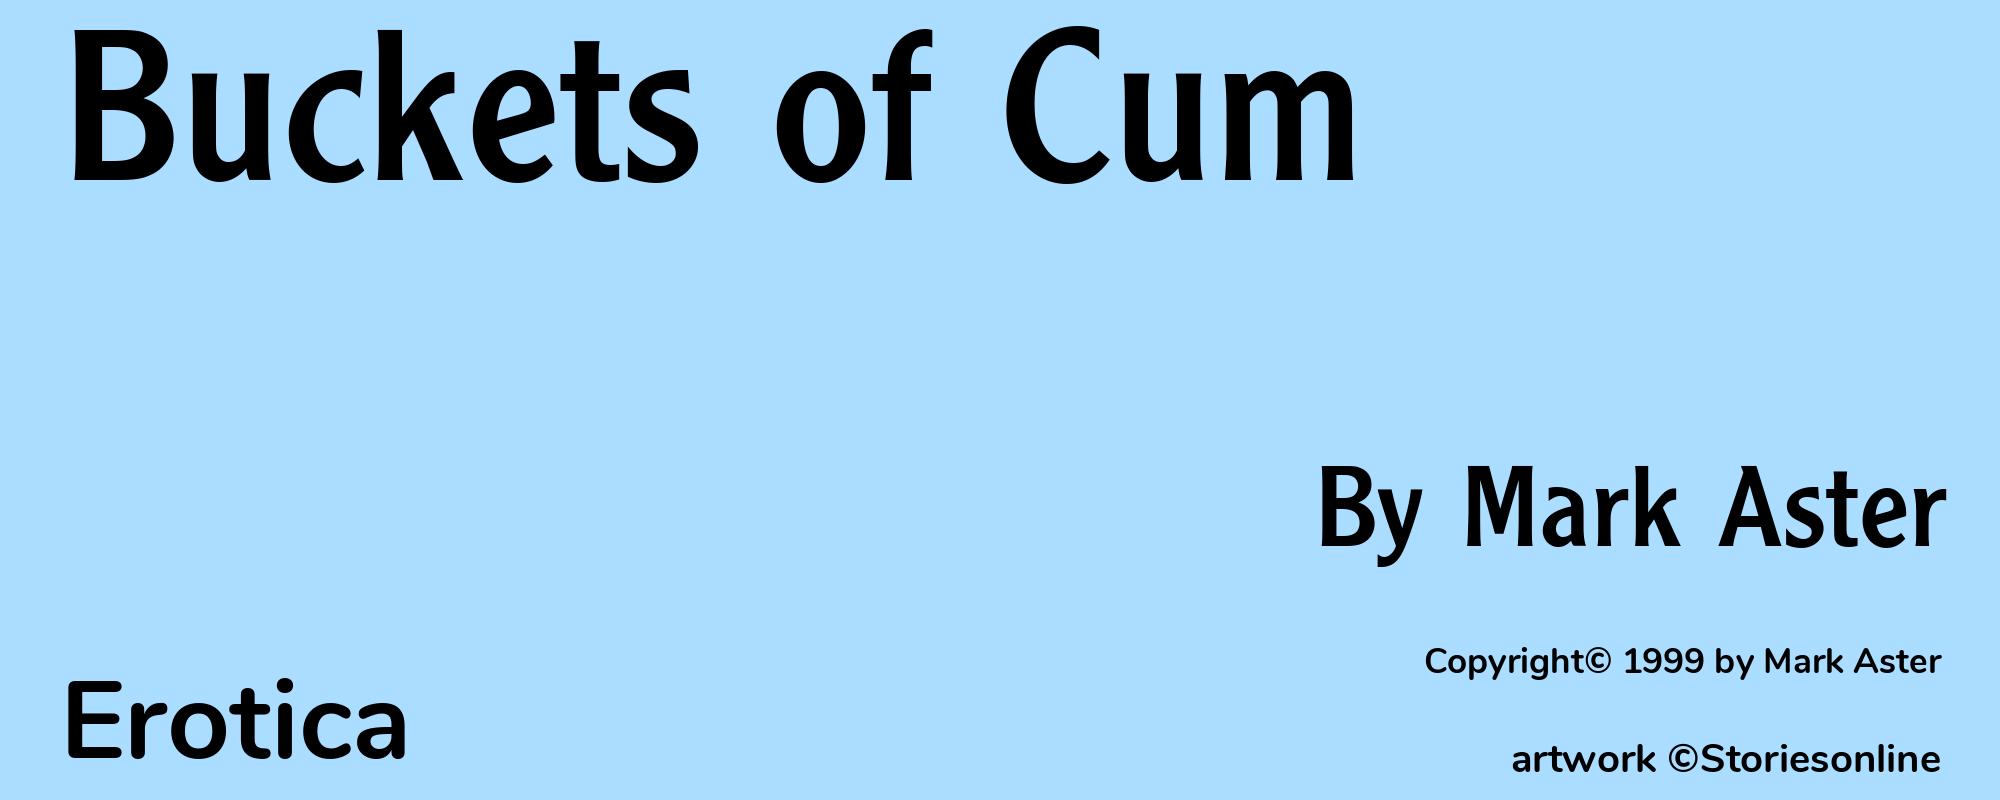 Buckets of Cum - Cover